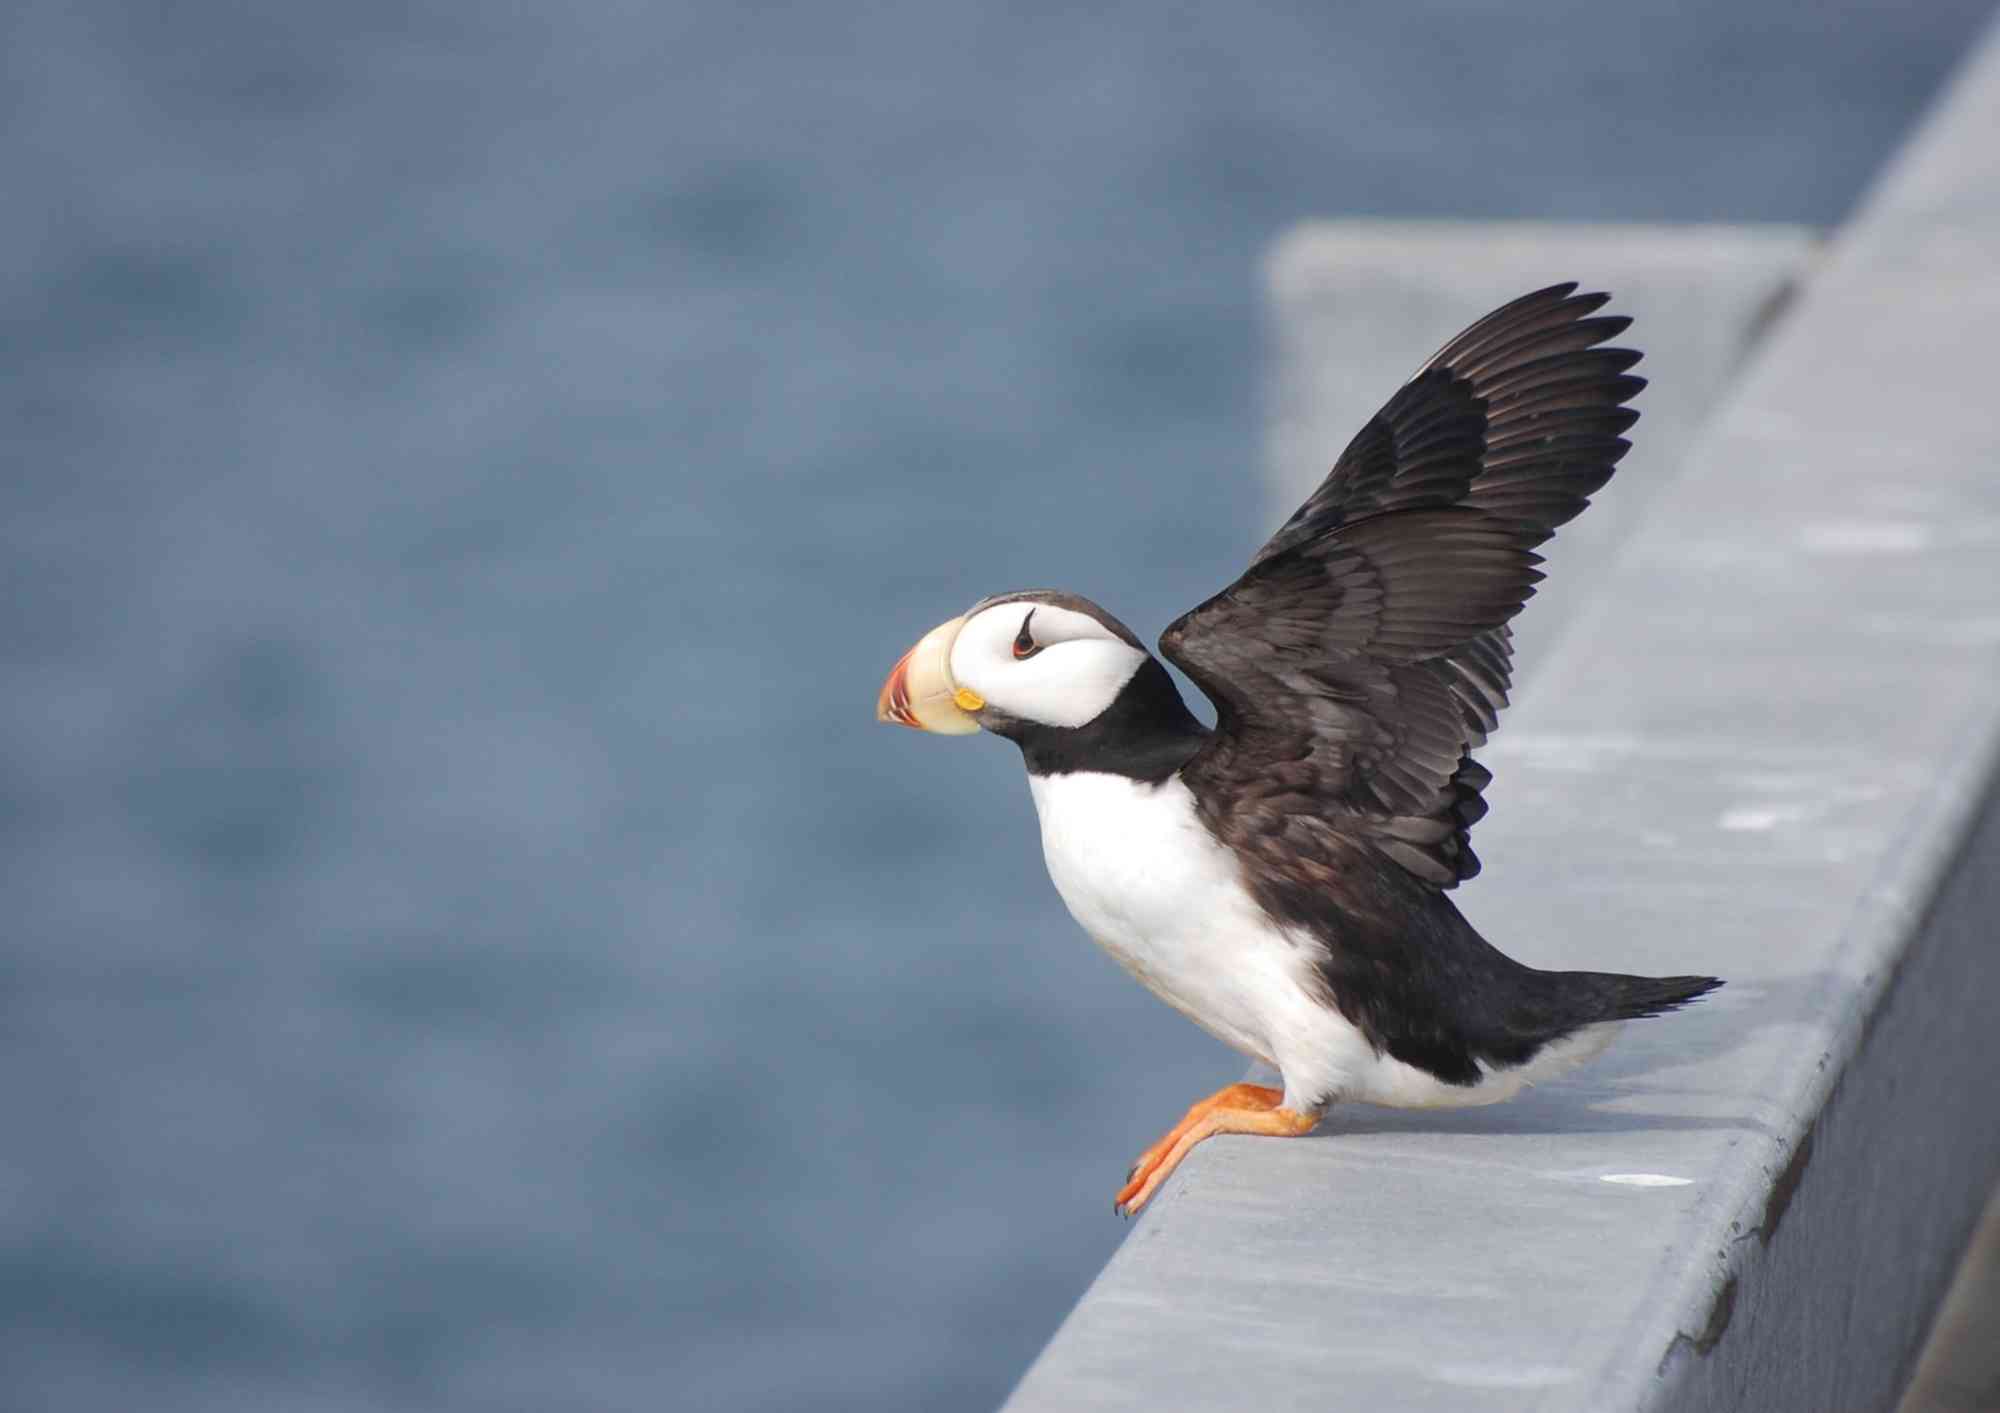 Horned puffin on a dock in Cold Bay, Alaska